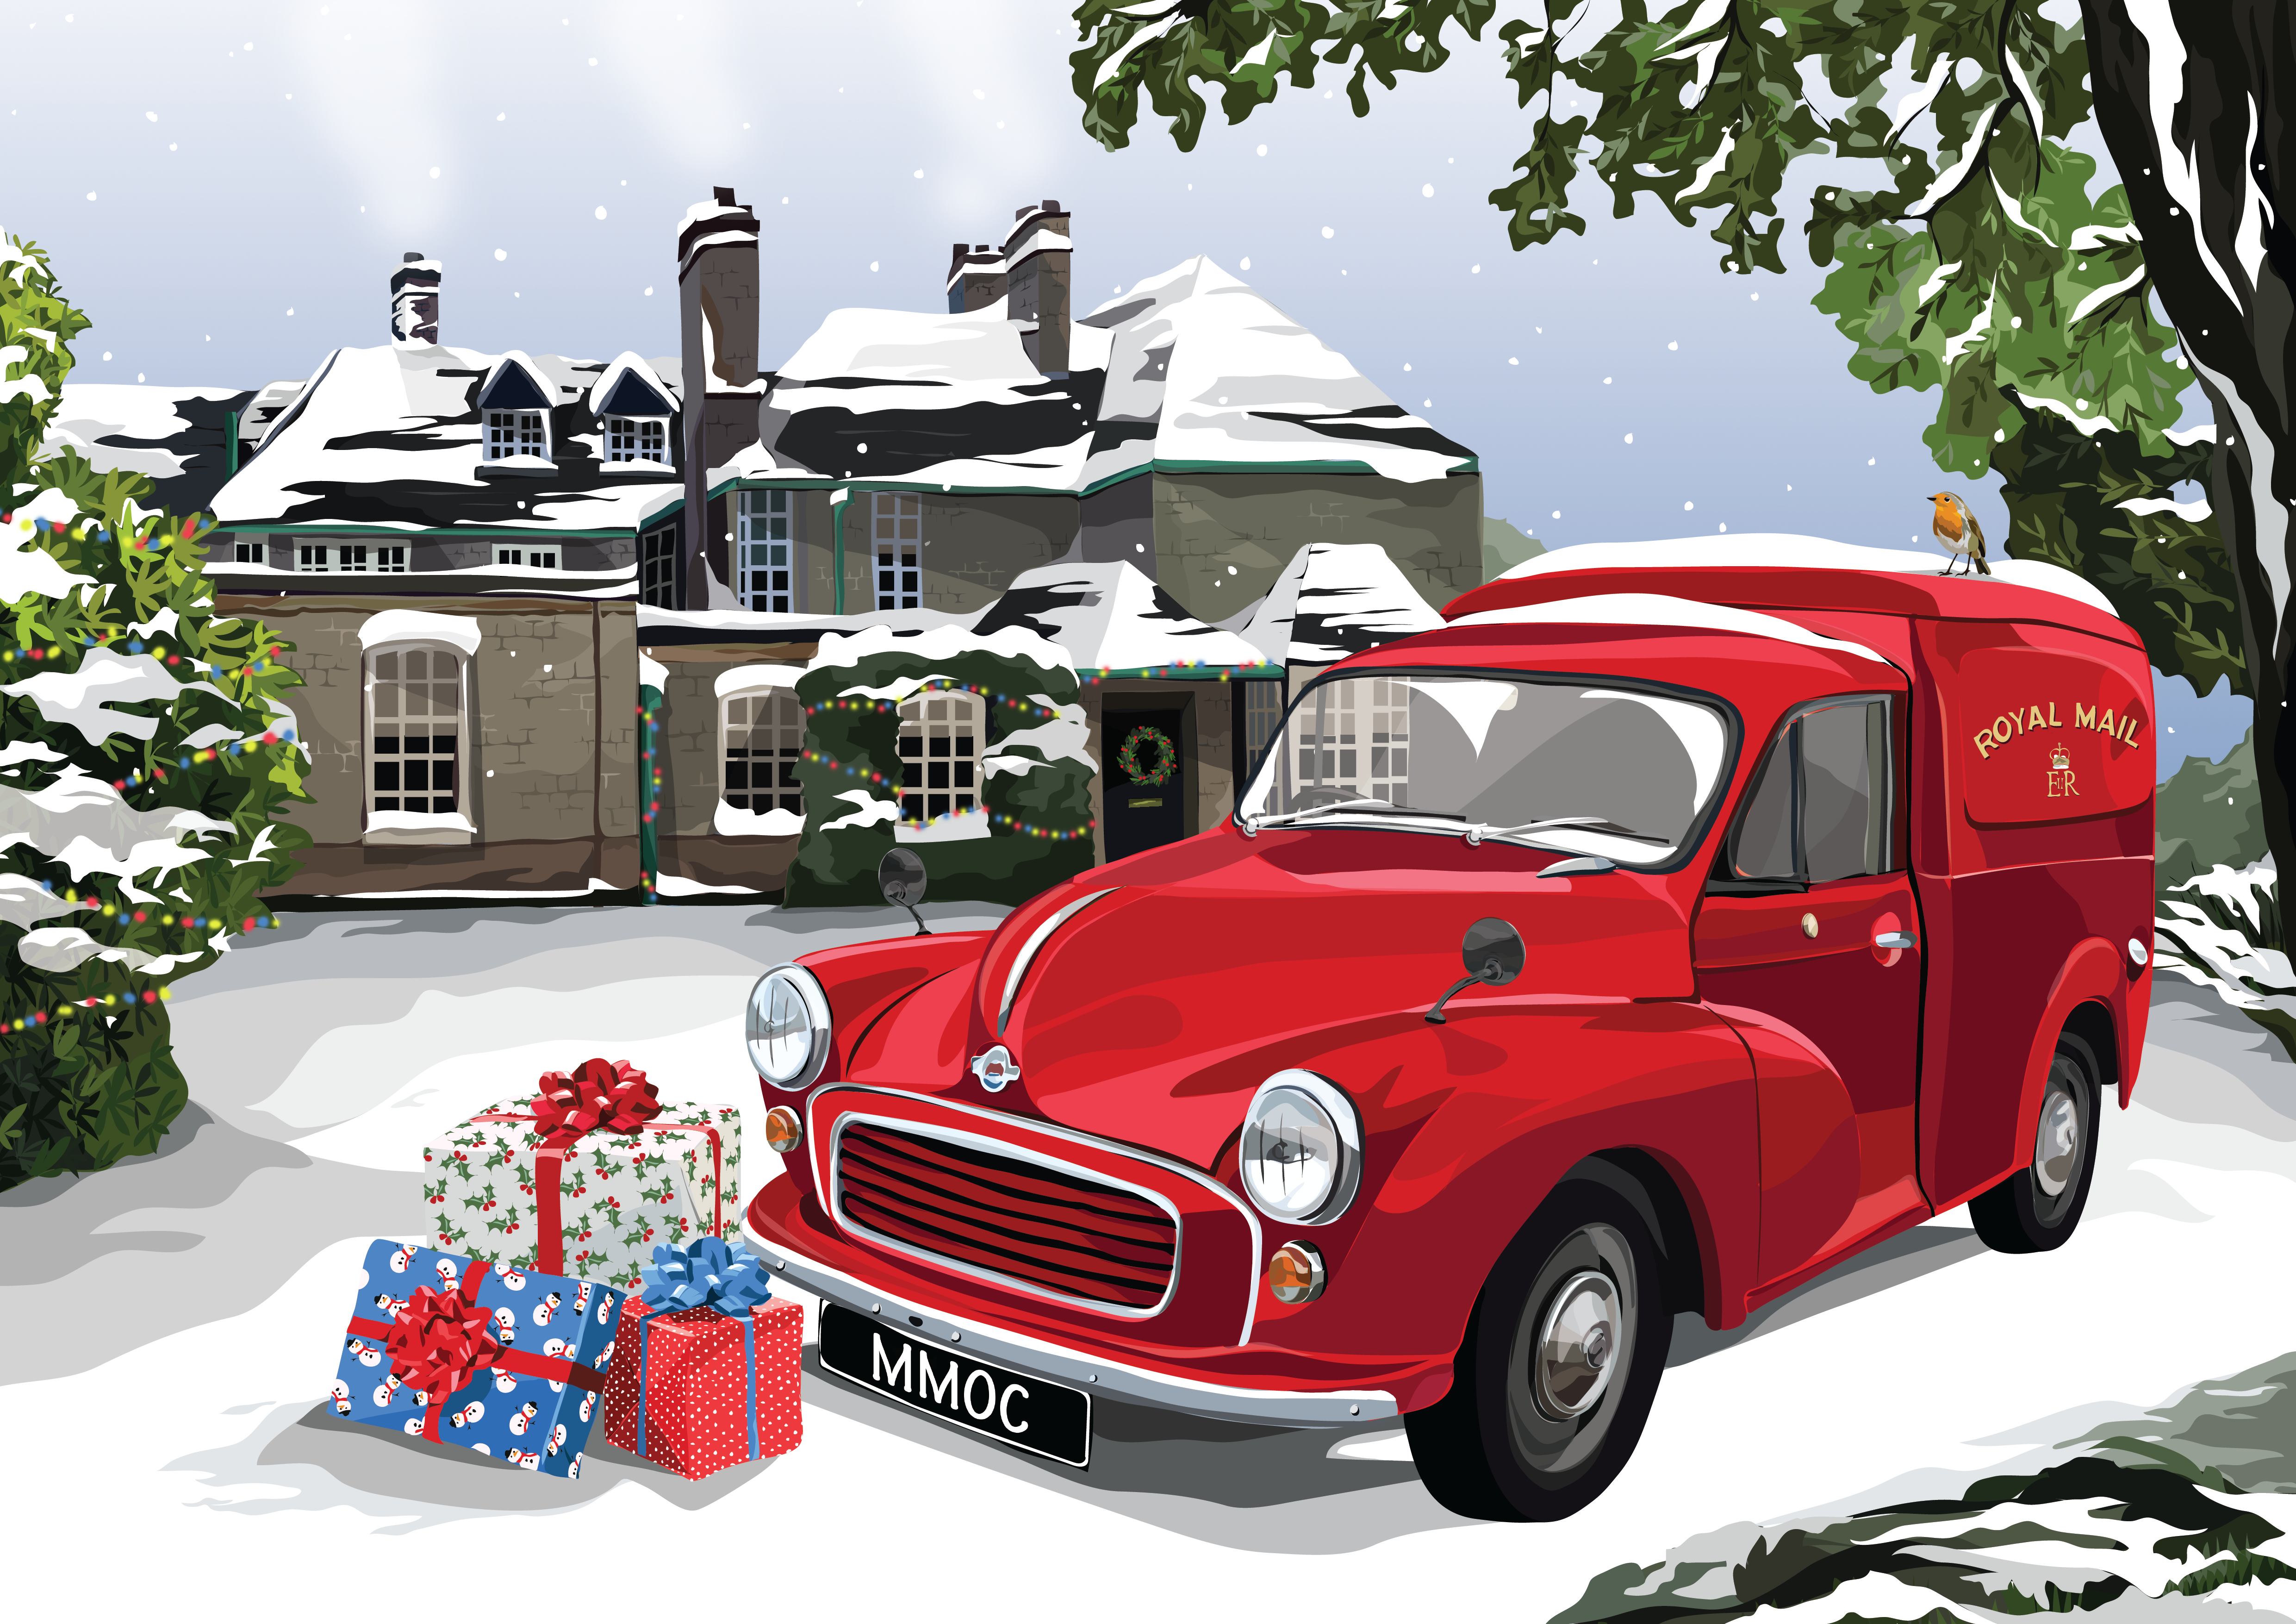 Christmas Cards - Nuffield Place (Royal Mail Van)